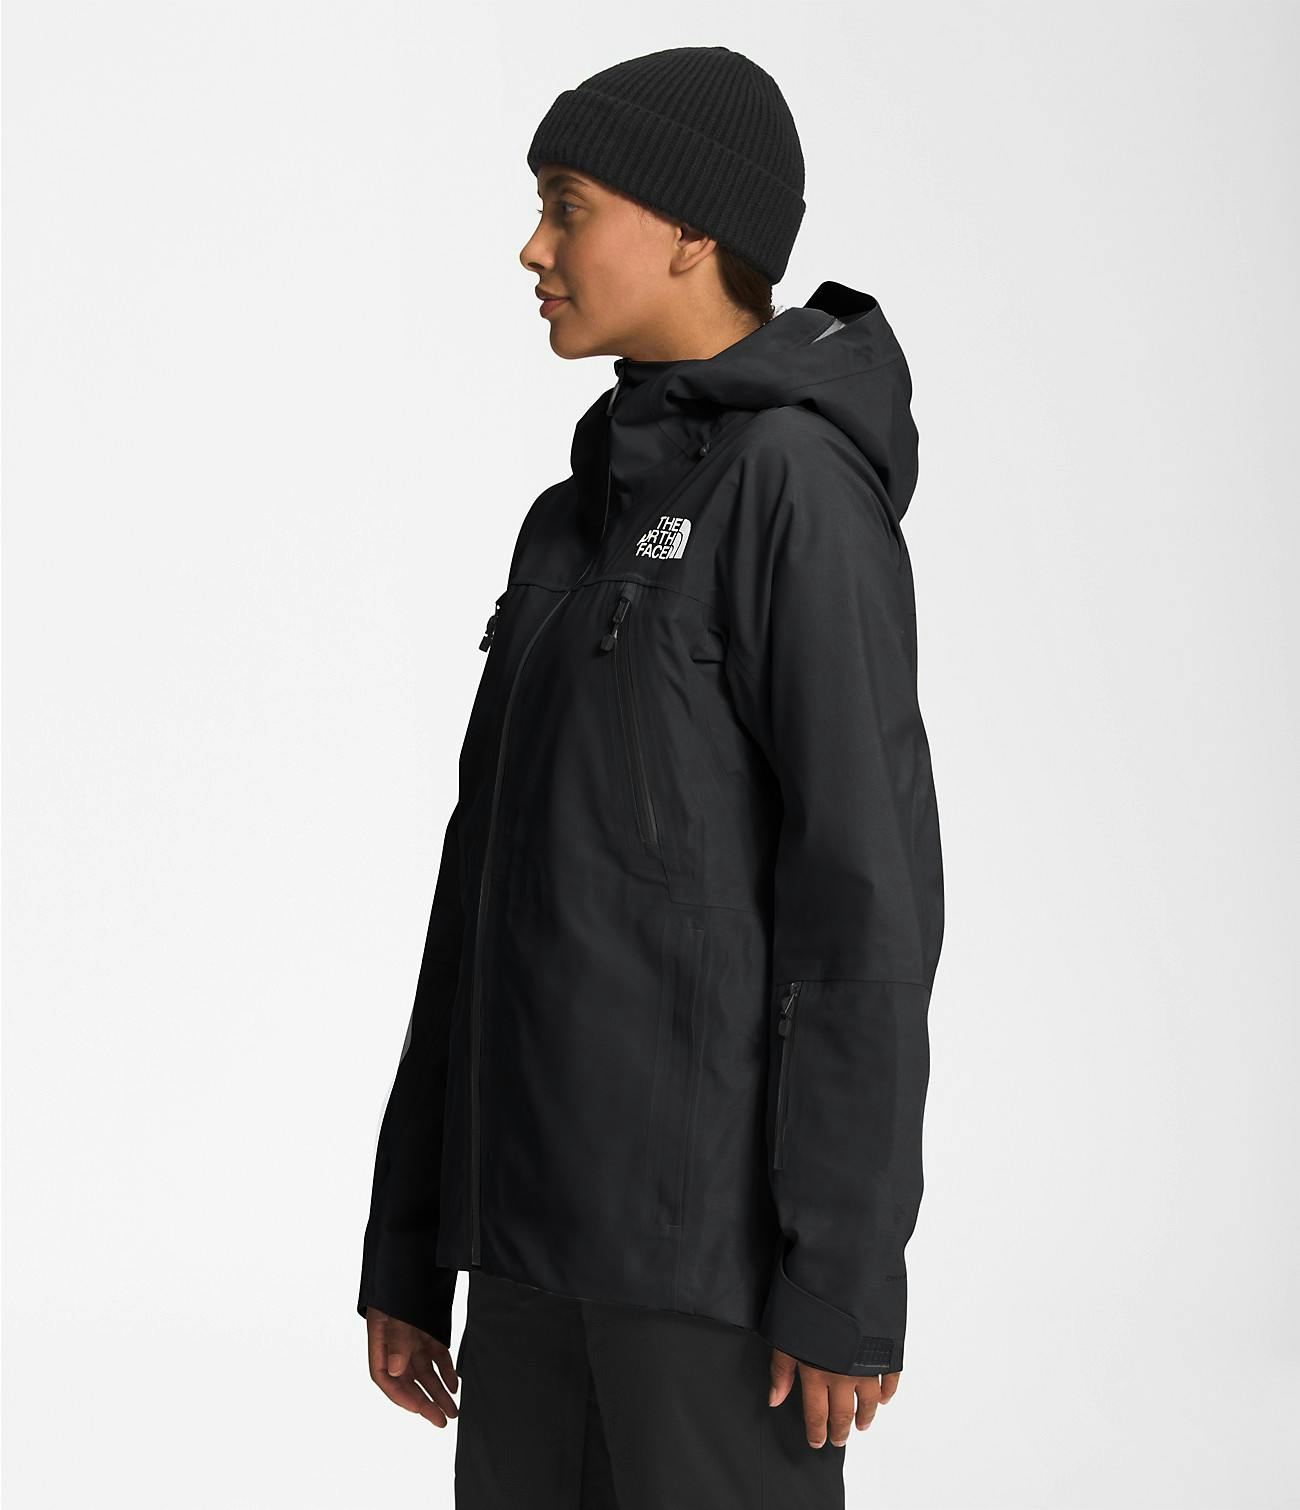 The North Face Women's Ceptor 3L Jacket